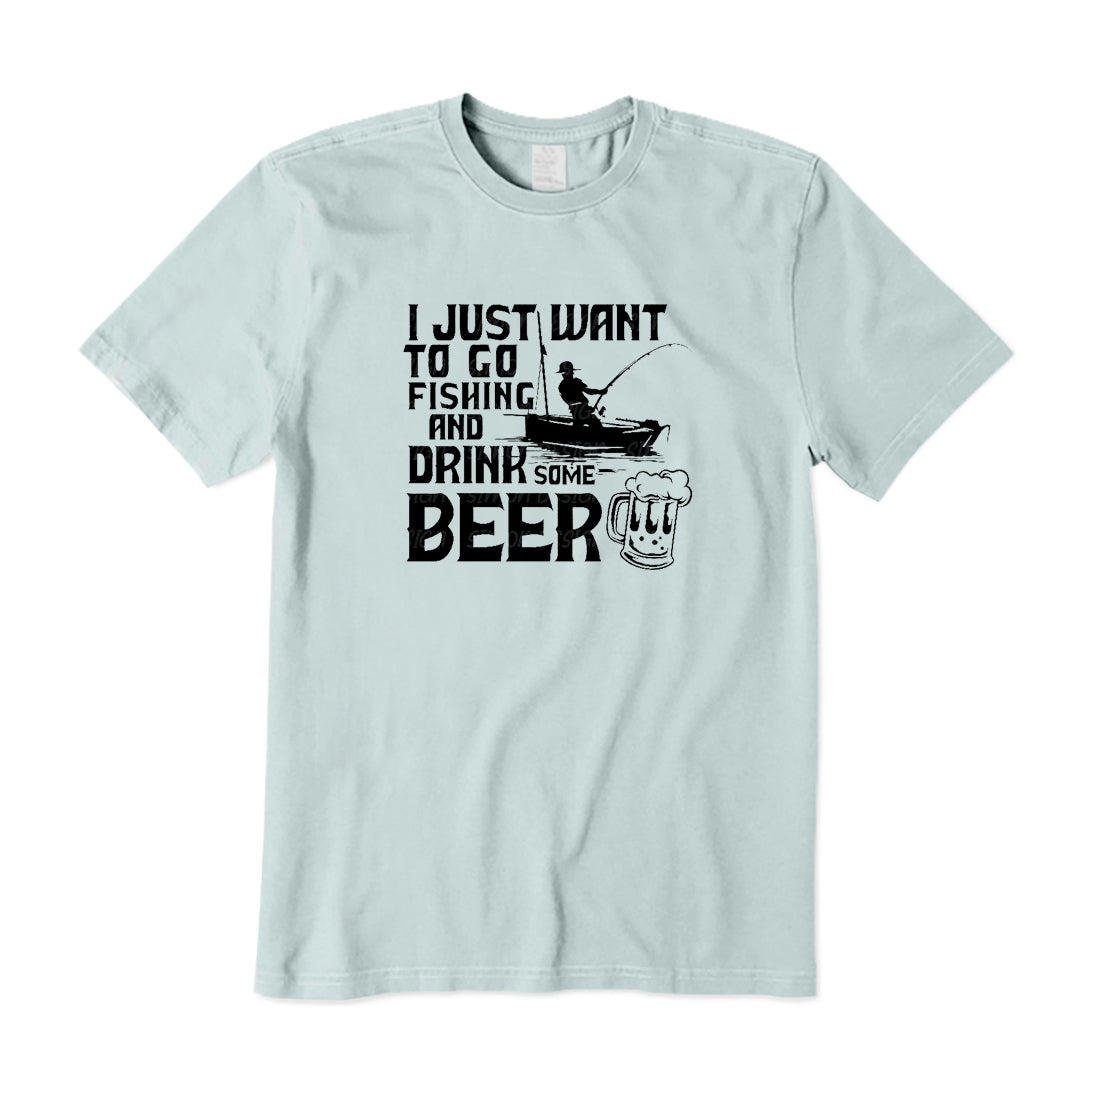 I Just Want to Go Fishing And Drink Some Beer T-Shirt